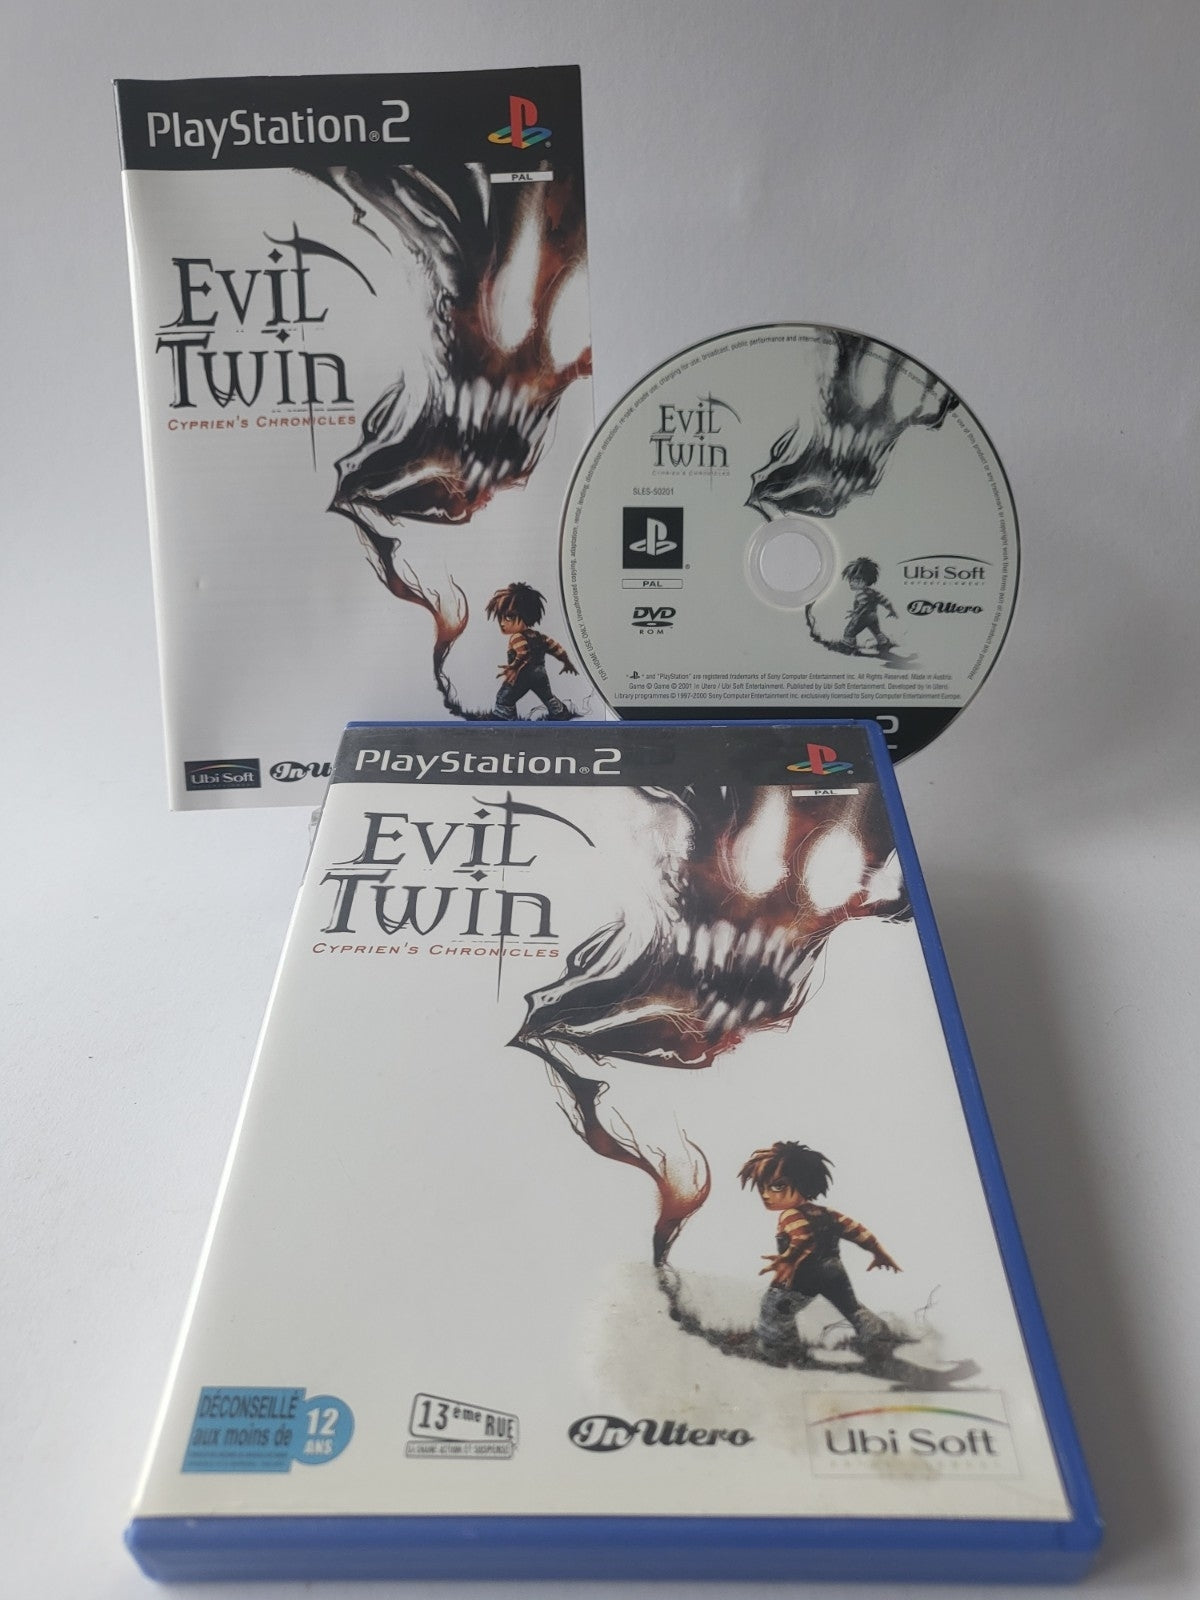 Evil Twin Cyprien's Chronicles Playstation 2